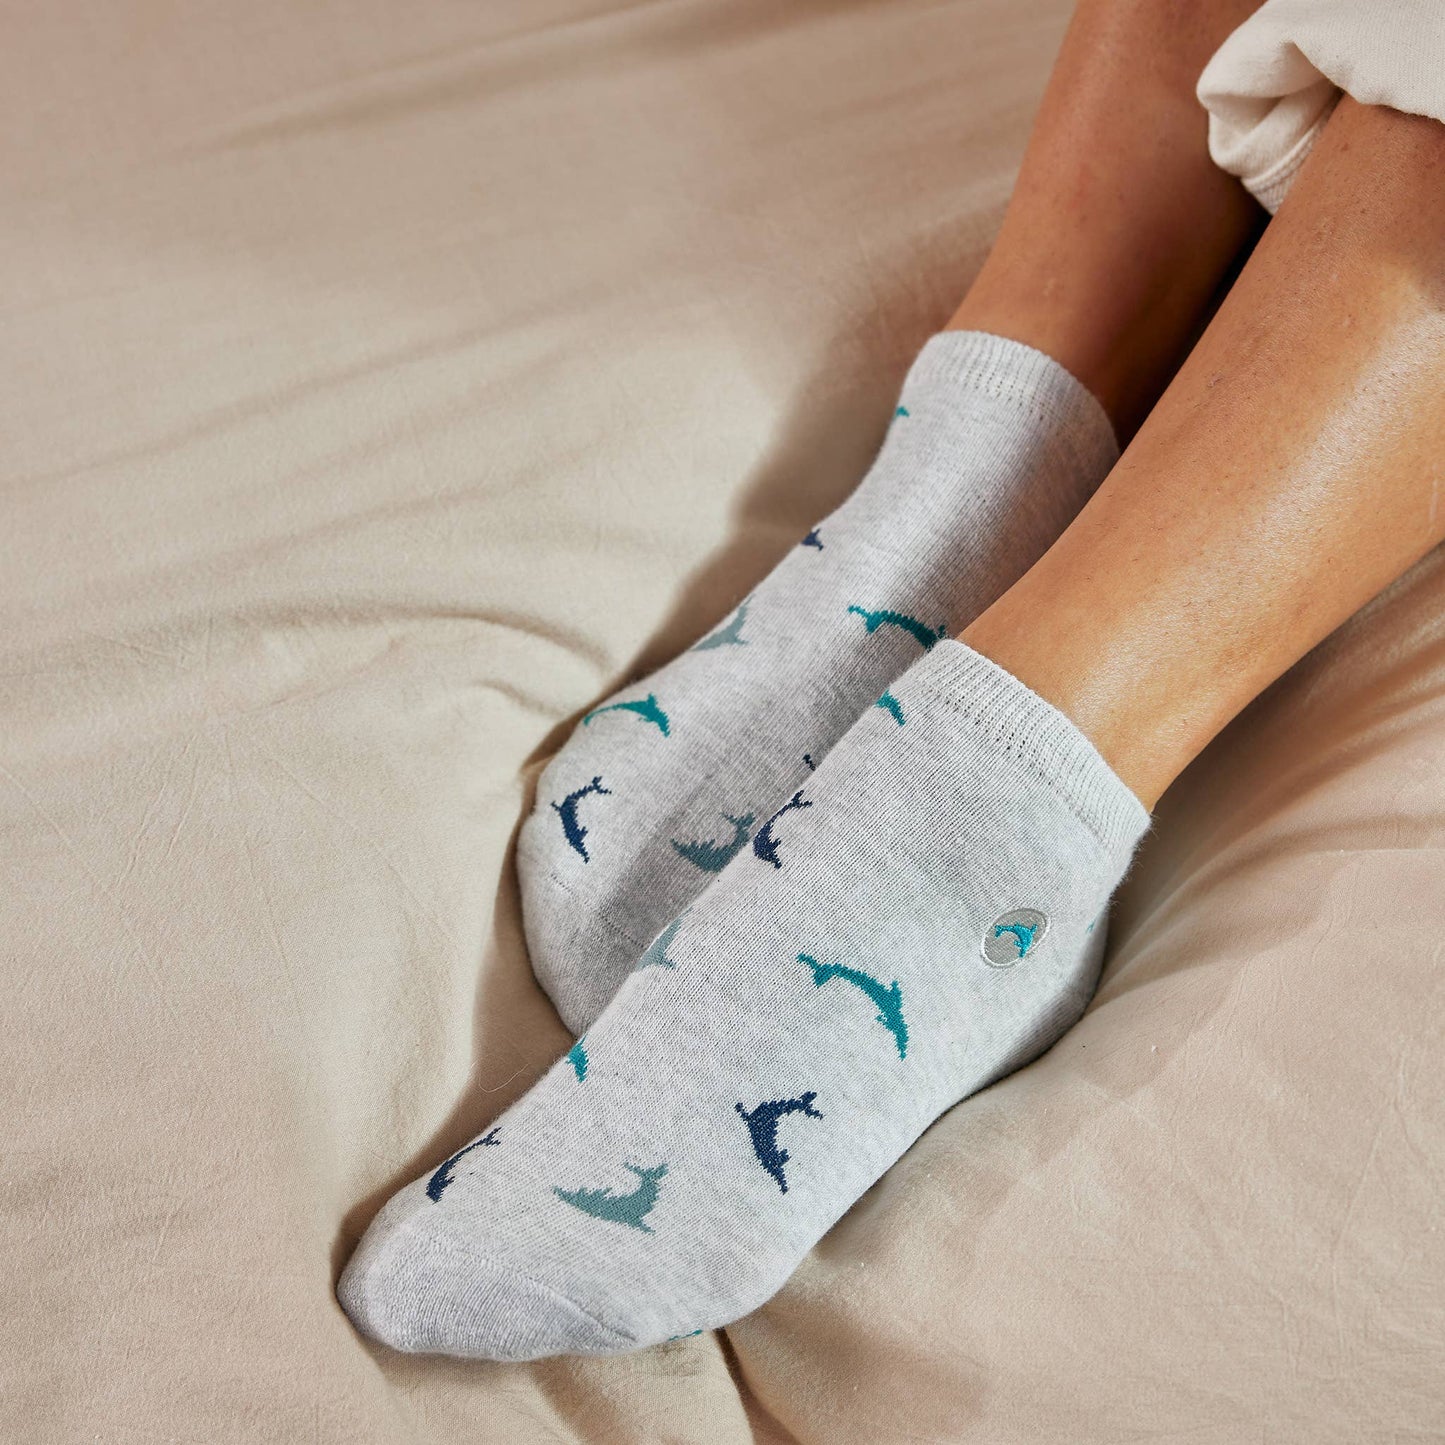 Ankle Socks that Protect Dolphins